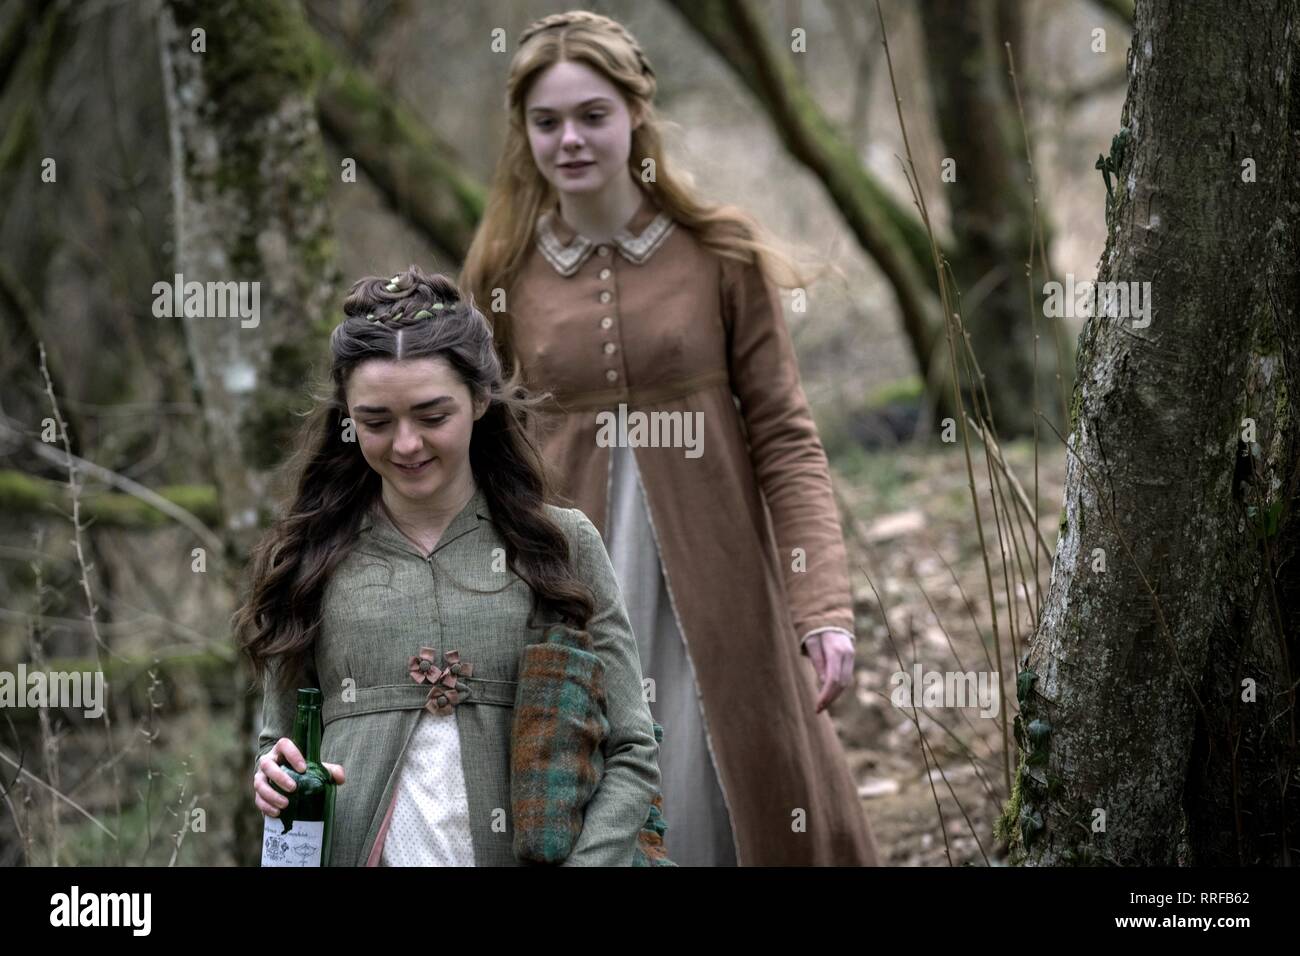 MAISIE WILLIAMS, ELLE FANNING, MARY SHELLEY, 2017 Stock Photo - Alamy